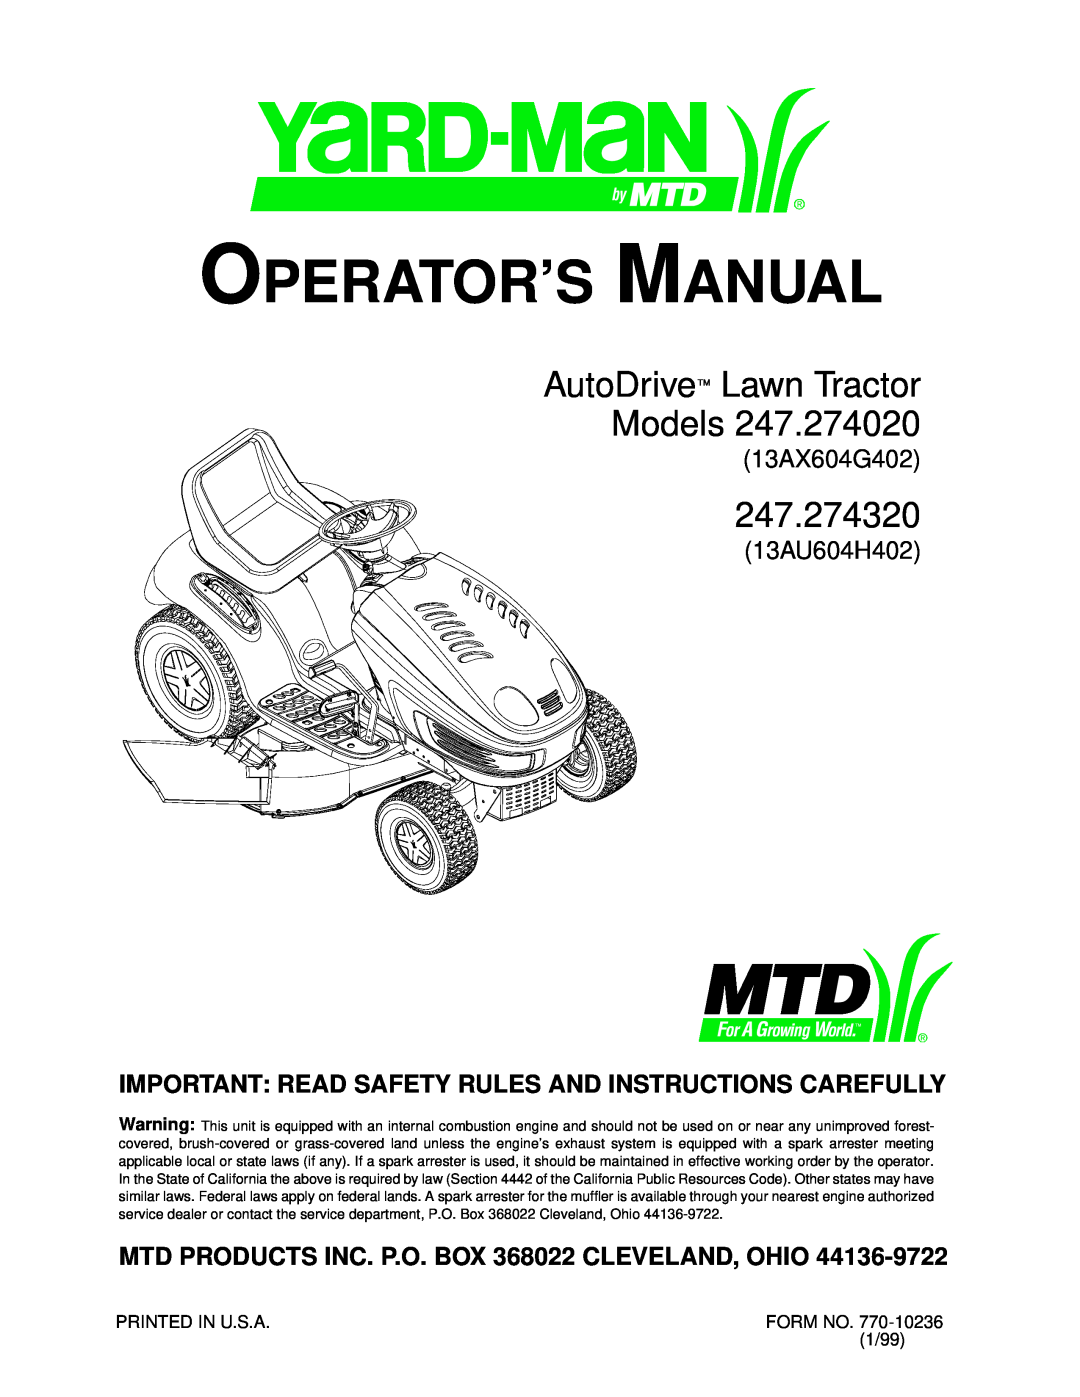 Yard-Man manual Important Read Safety Rules And Instructions Carefully, Operator’S Manual, 247.274320, 13AX604G402 